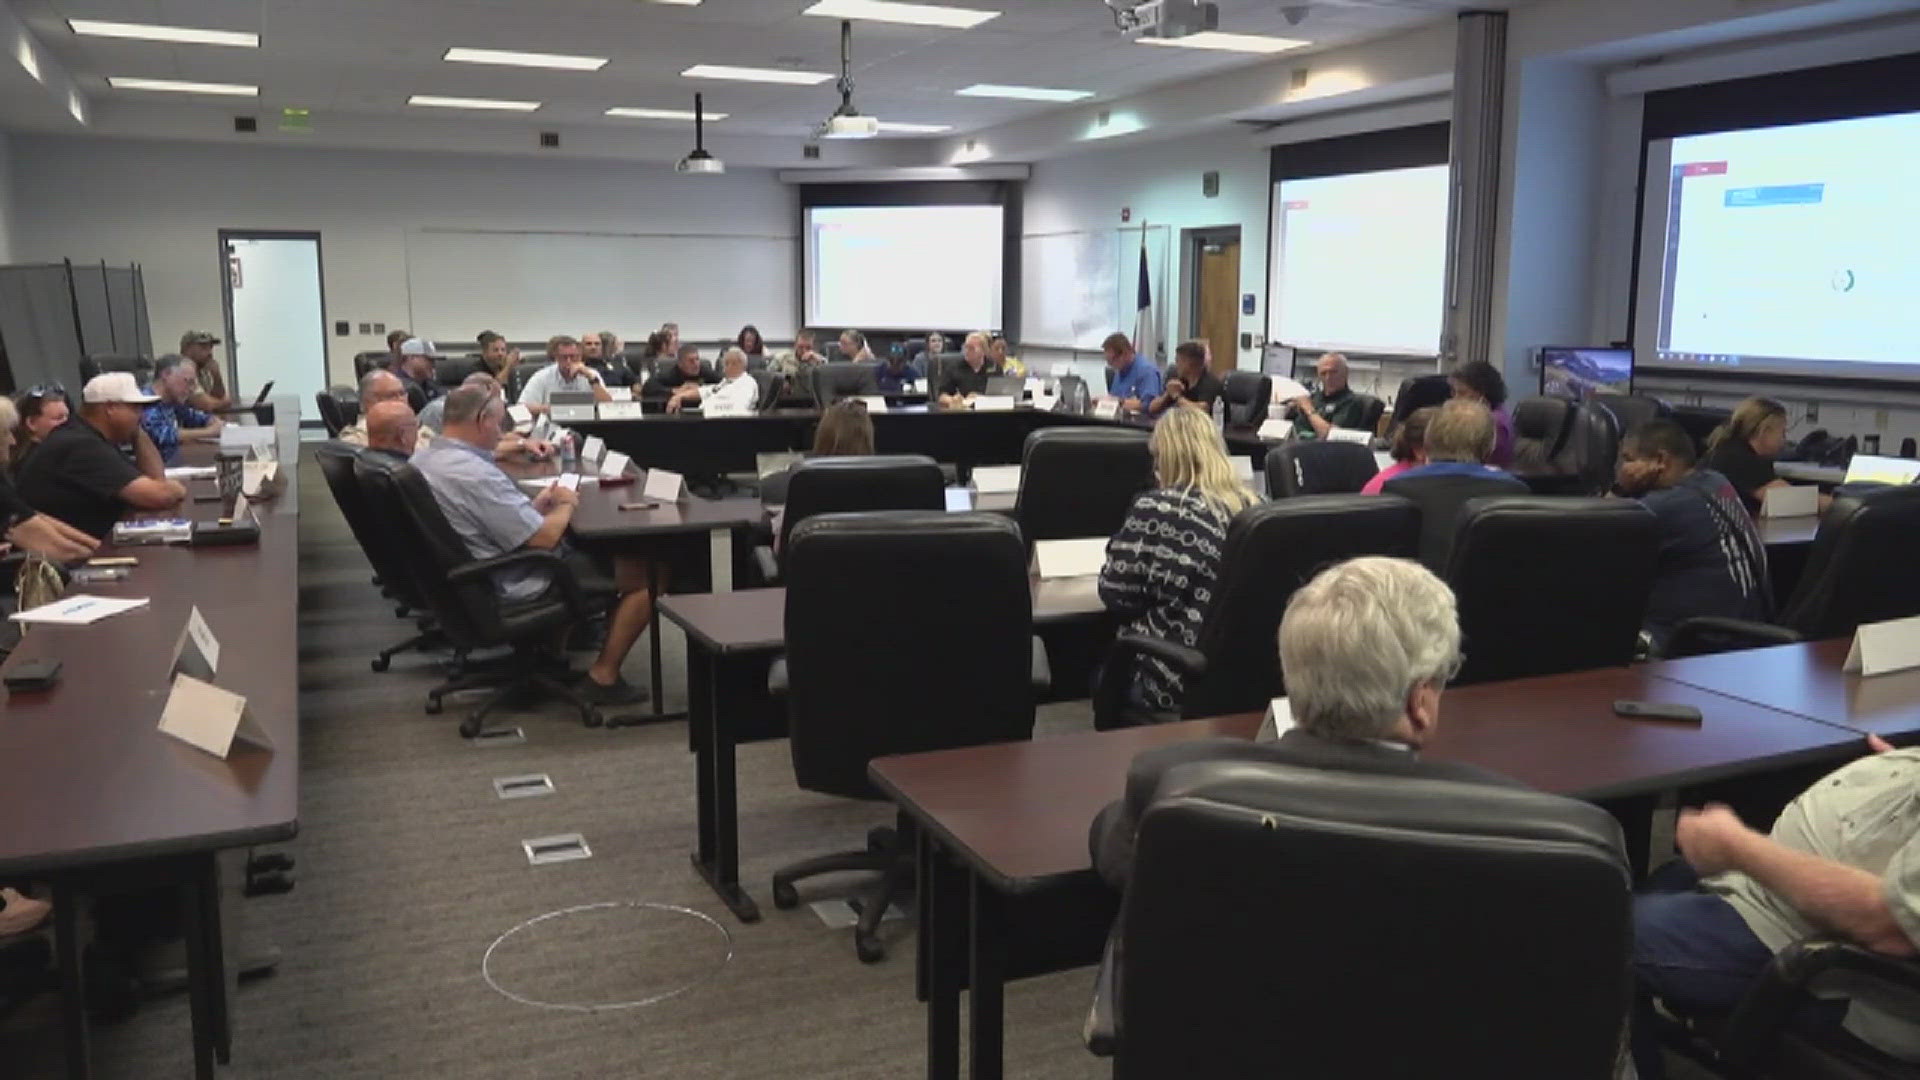 The decision came after a county emergency meeting was held in Rockport last night.